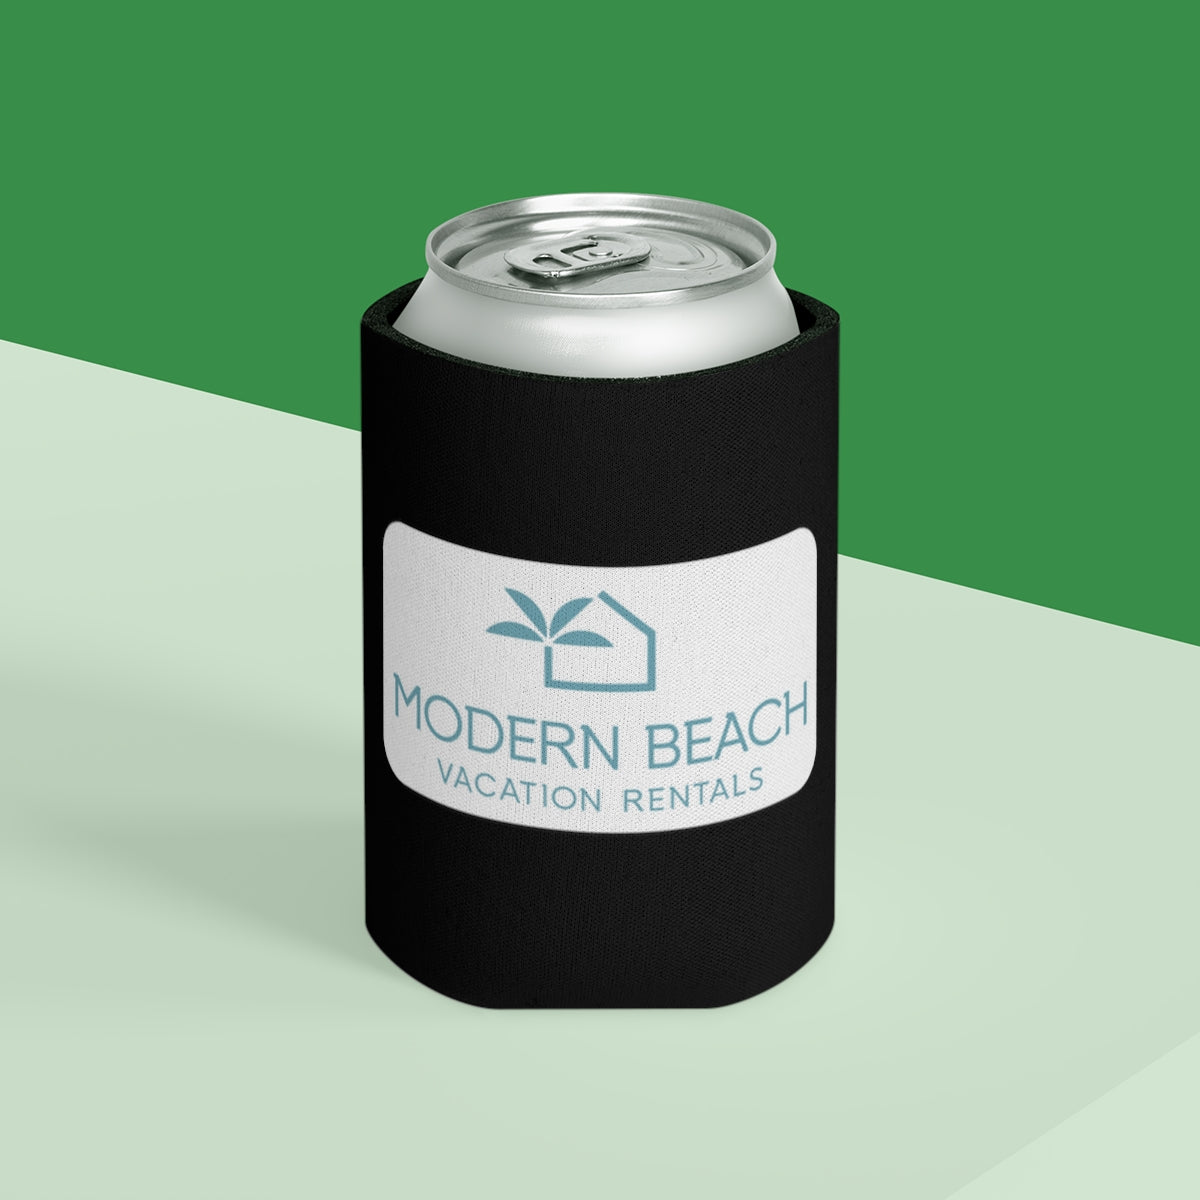 Modern Beach Vacation Rentals White Rectangle Logo Black Can Coozie Cooler